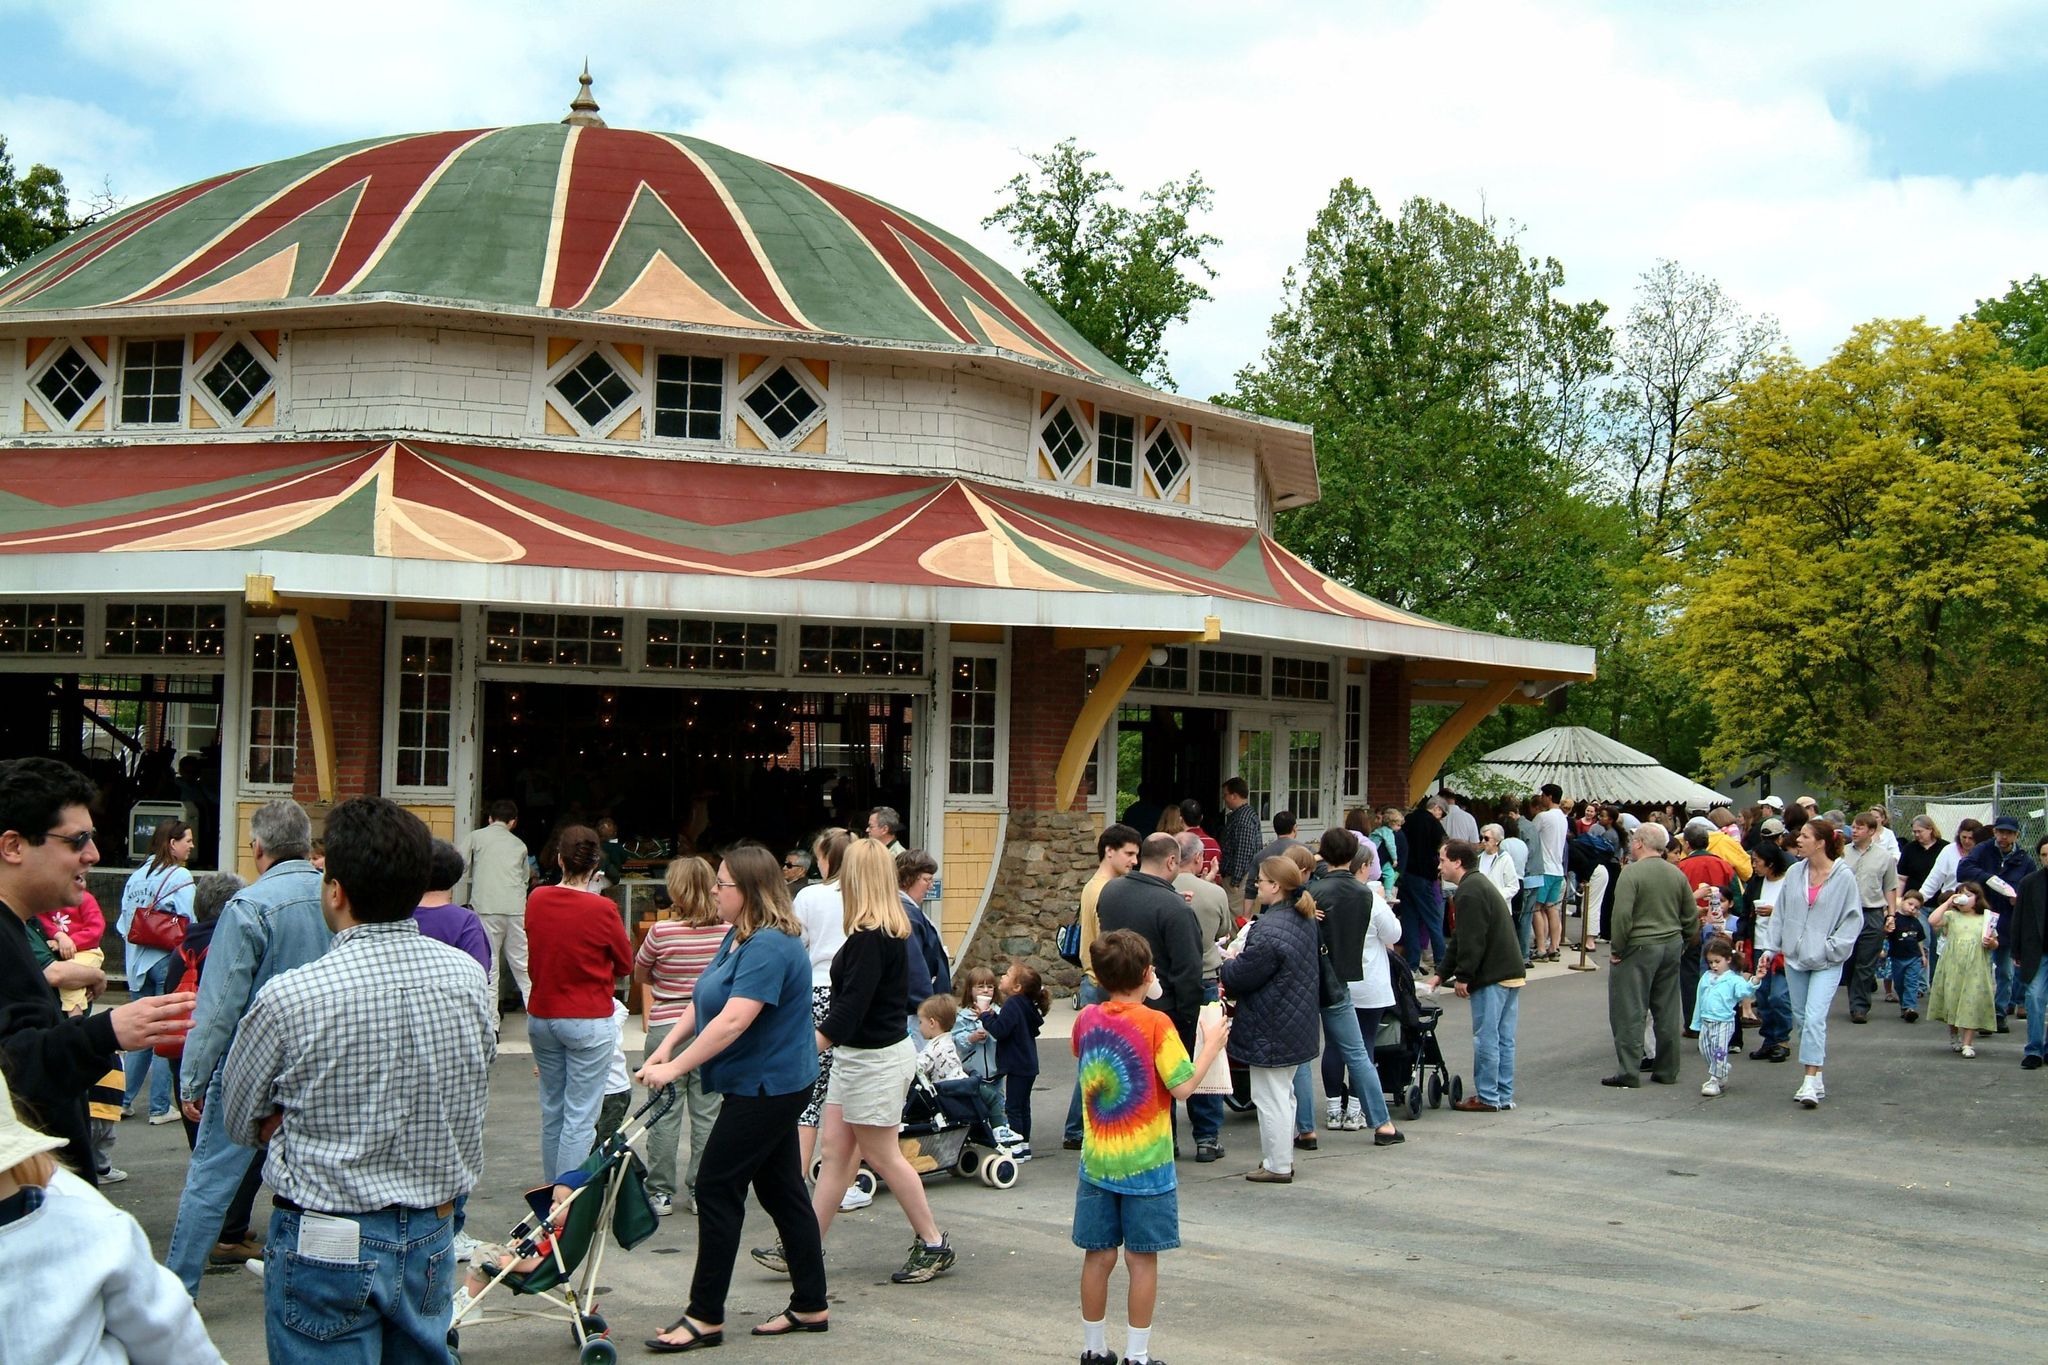 Glen Echo Park and the Dentzel Carousel are enjoyed by children and adults.